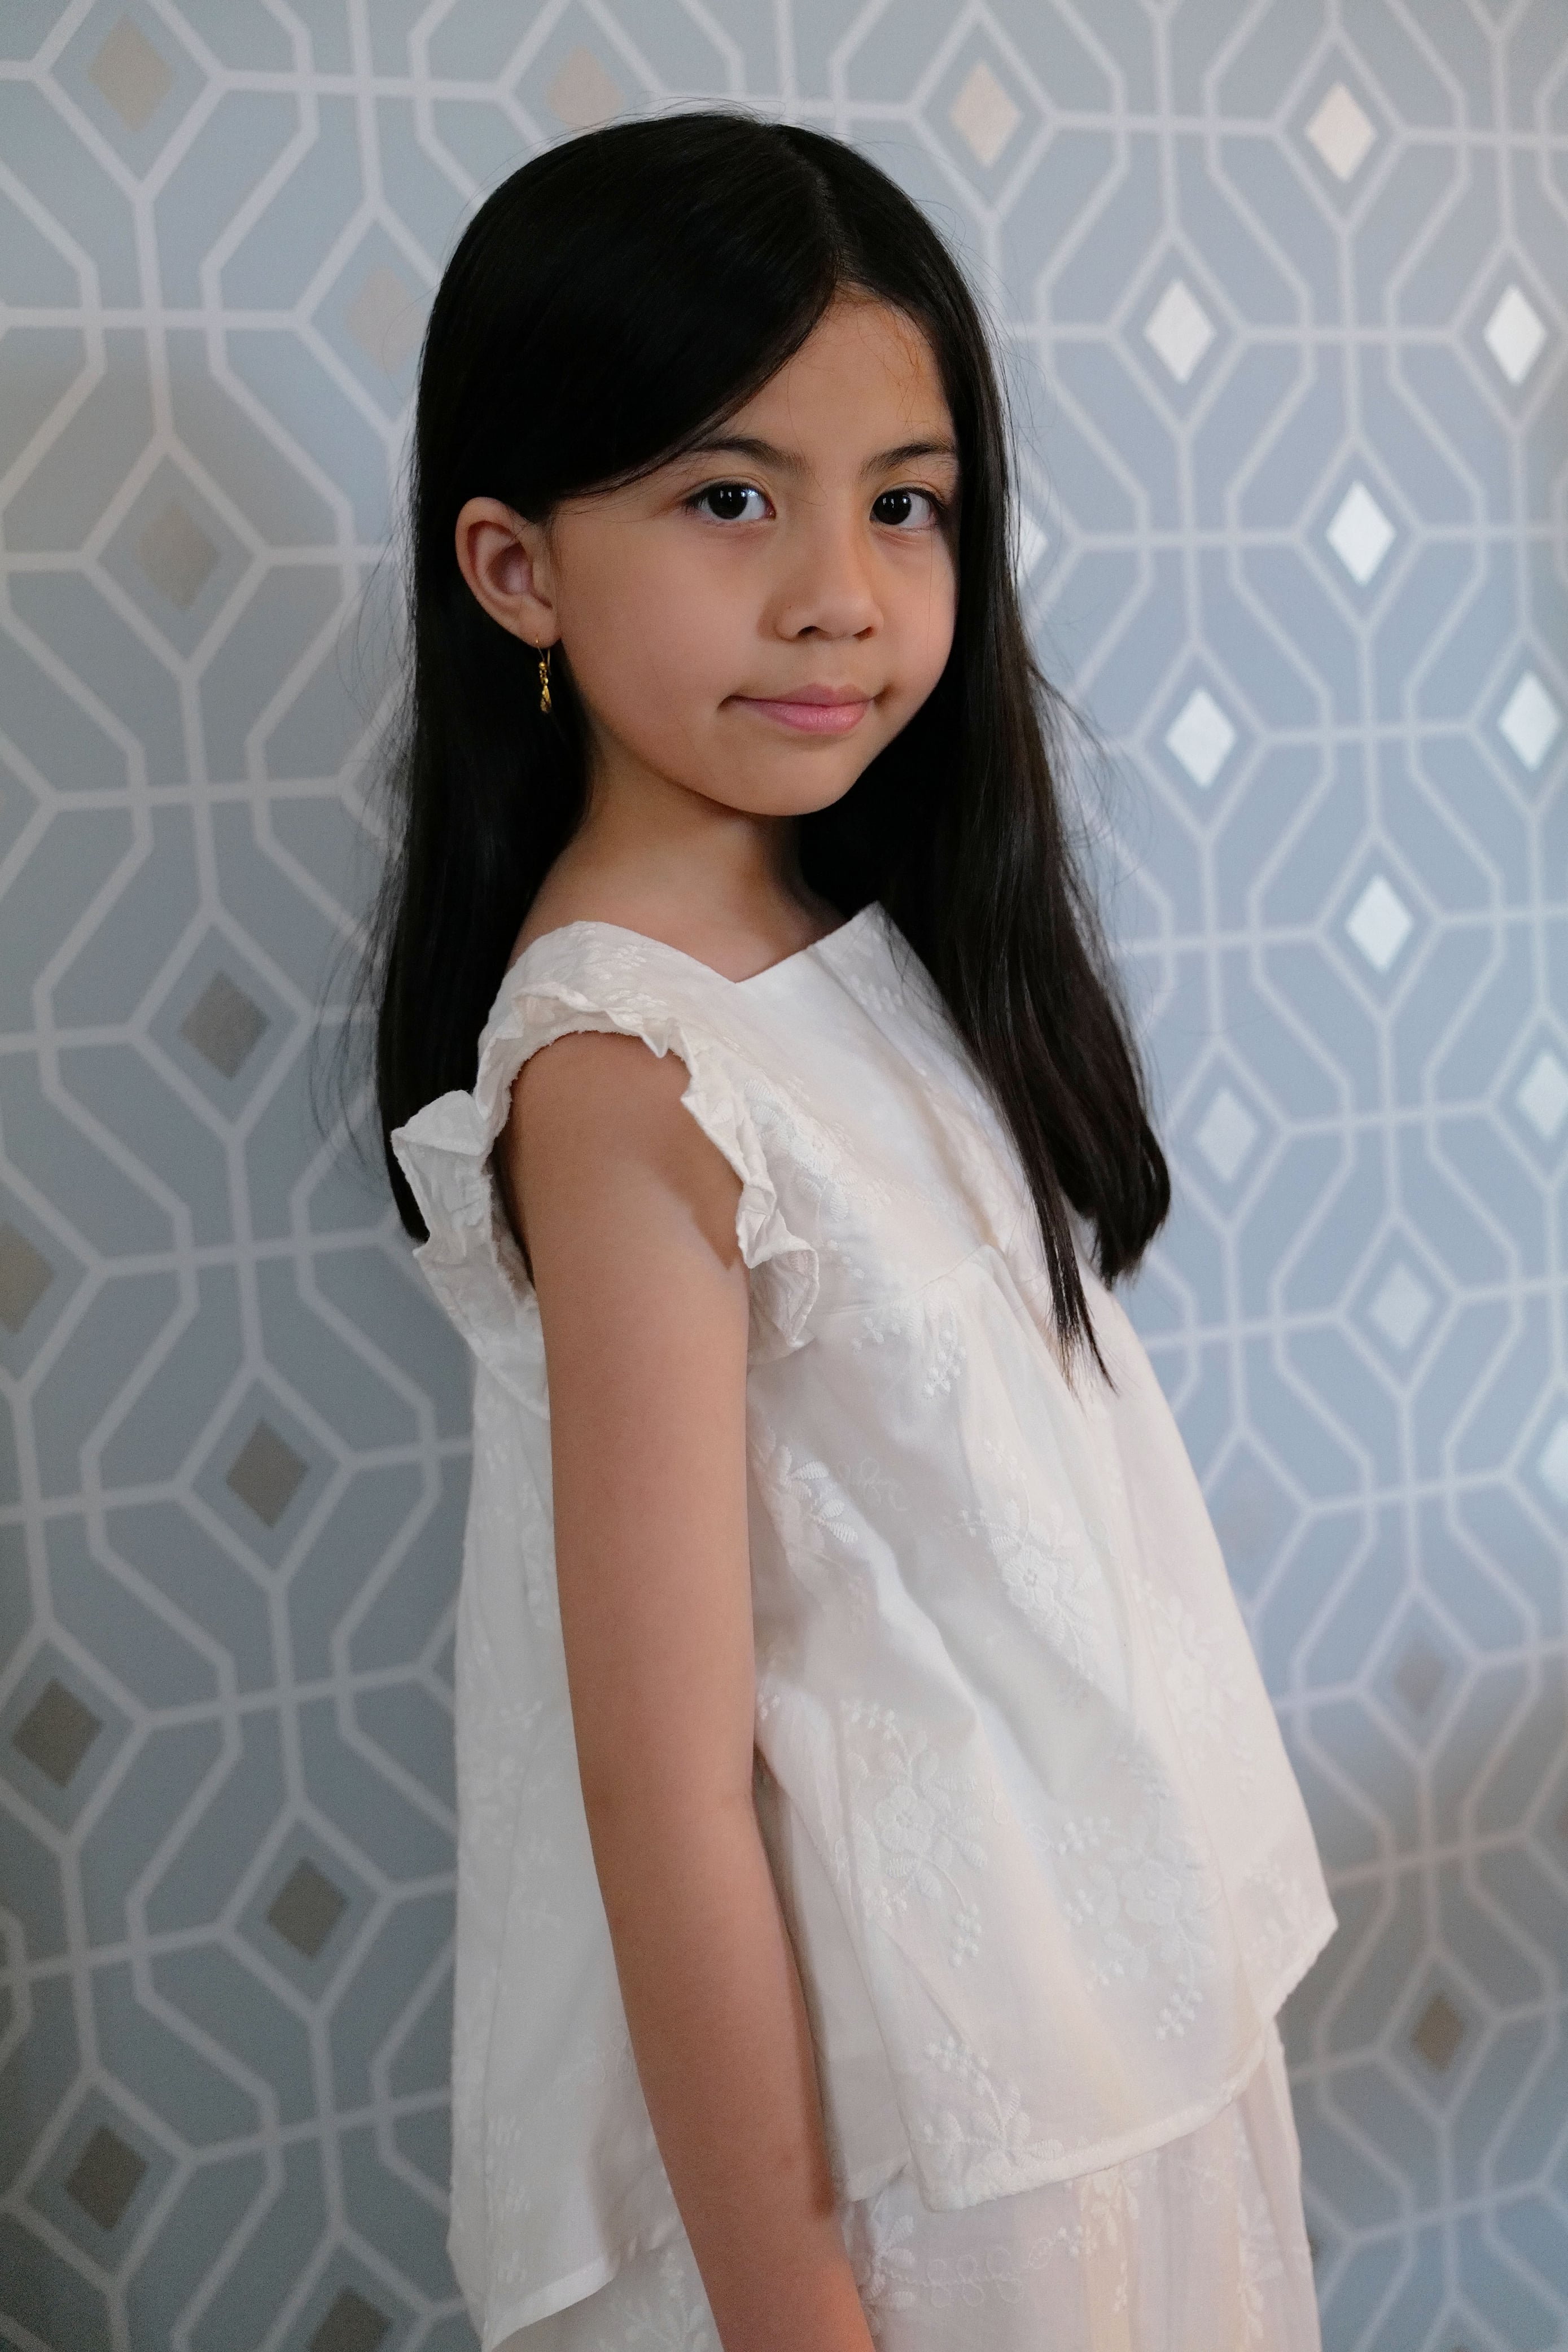 Little girl wearing white dress and posing for the camera